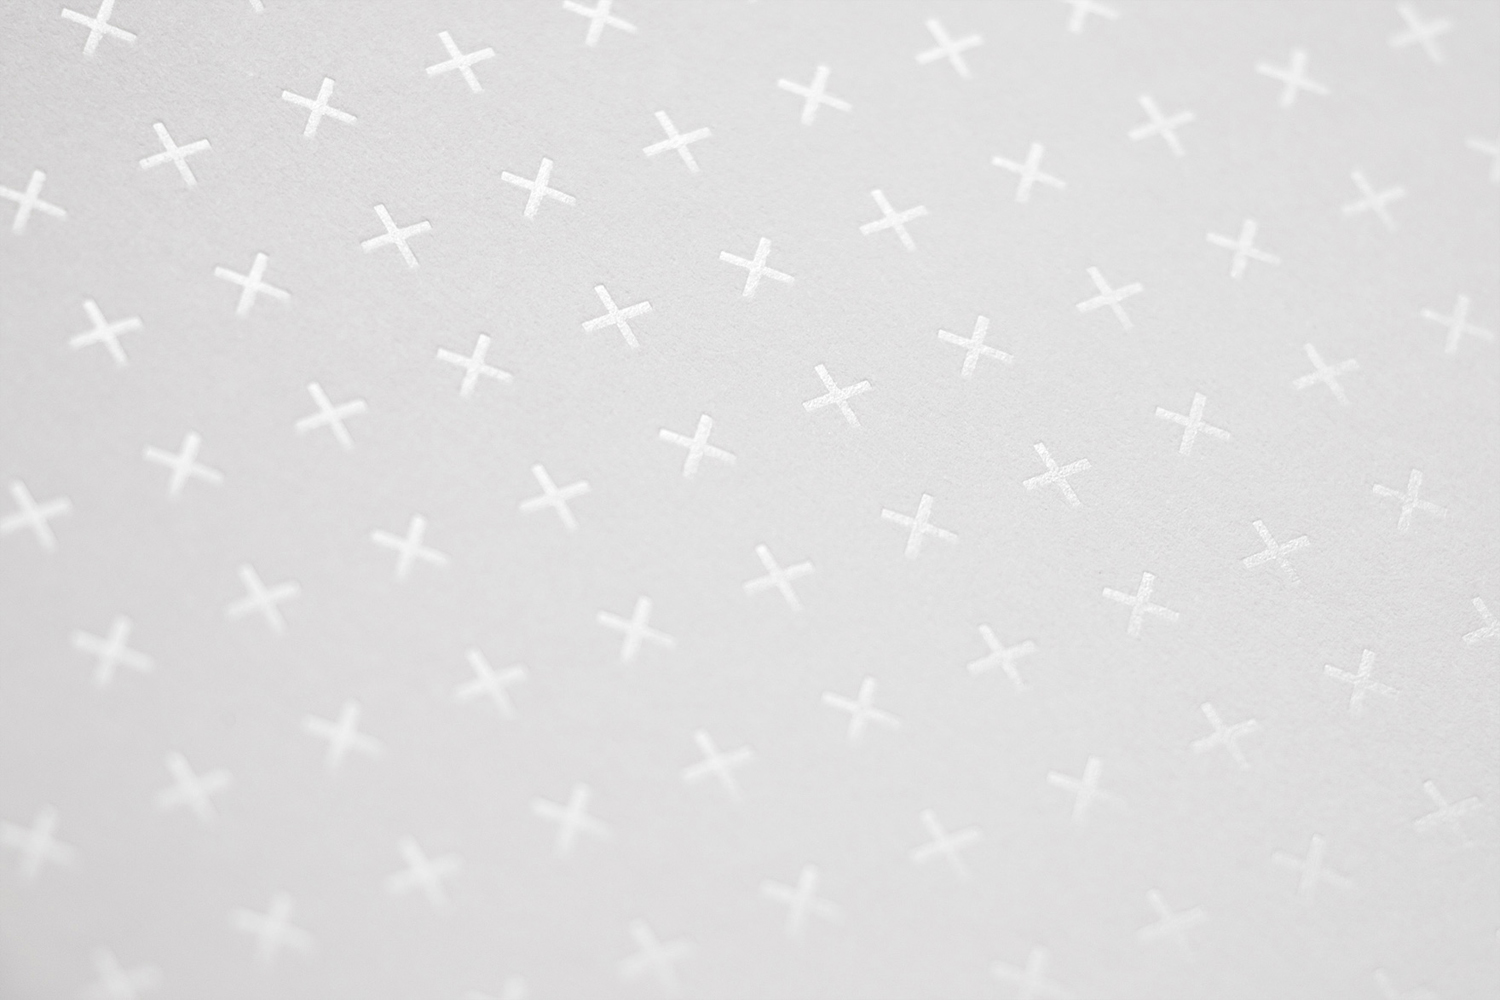 Brand identity and clear foil pattern for American venture capital firm Lux Capital by Mucho, United States